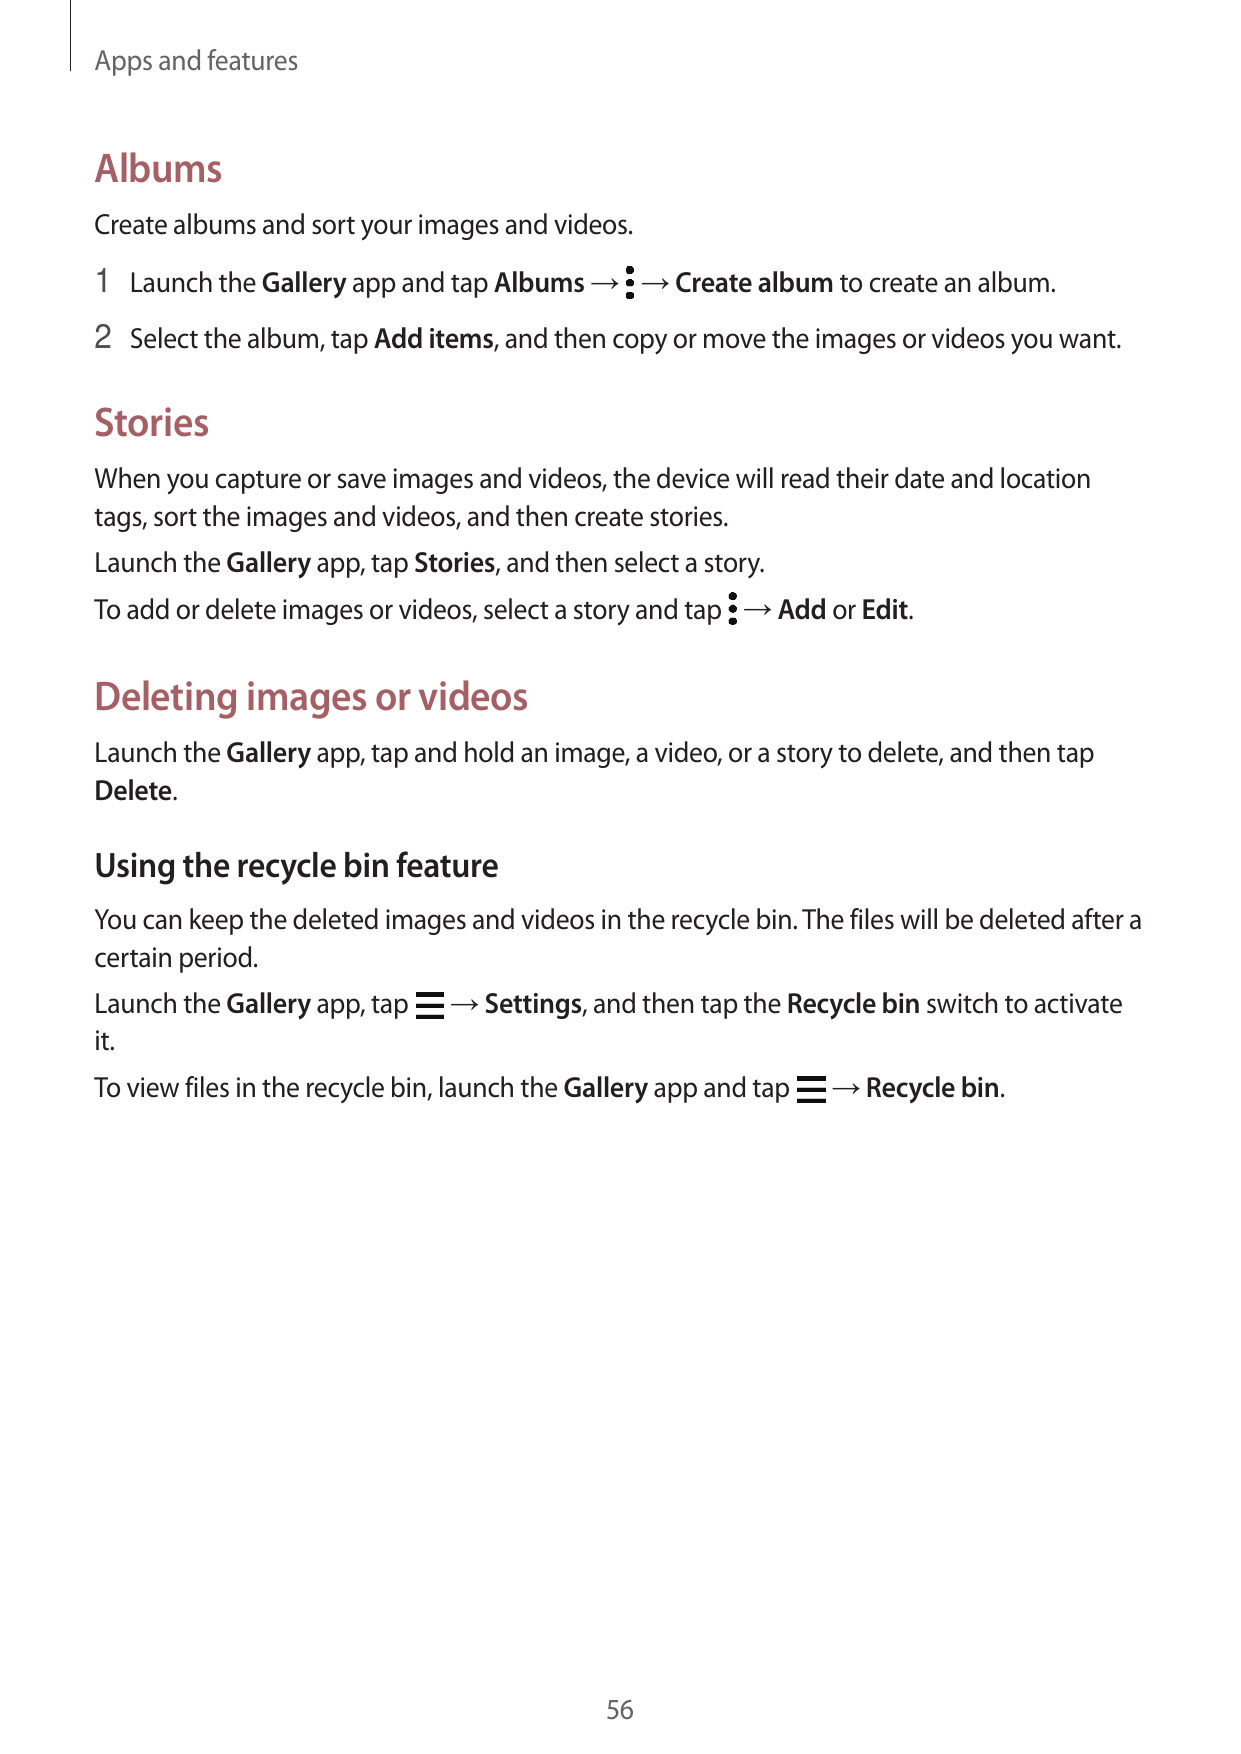 Apps and featuresAlbumsCreate albums and sort your images and videos.1 Launch the Gallery app and tap Albums → → Create album to